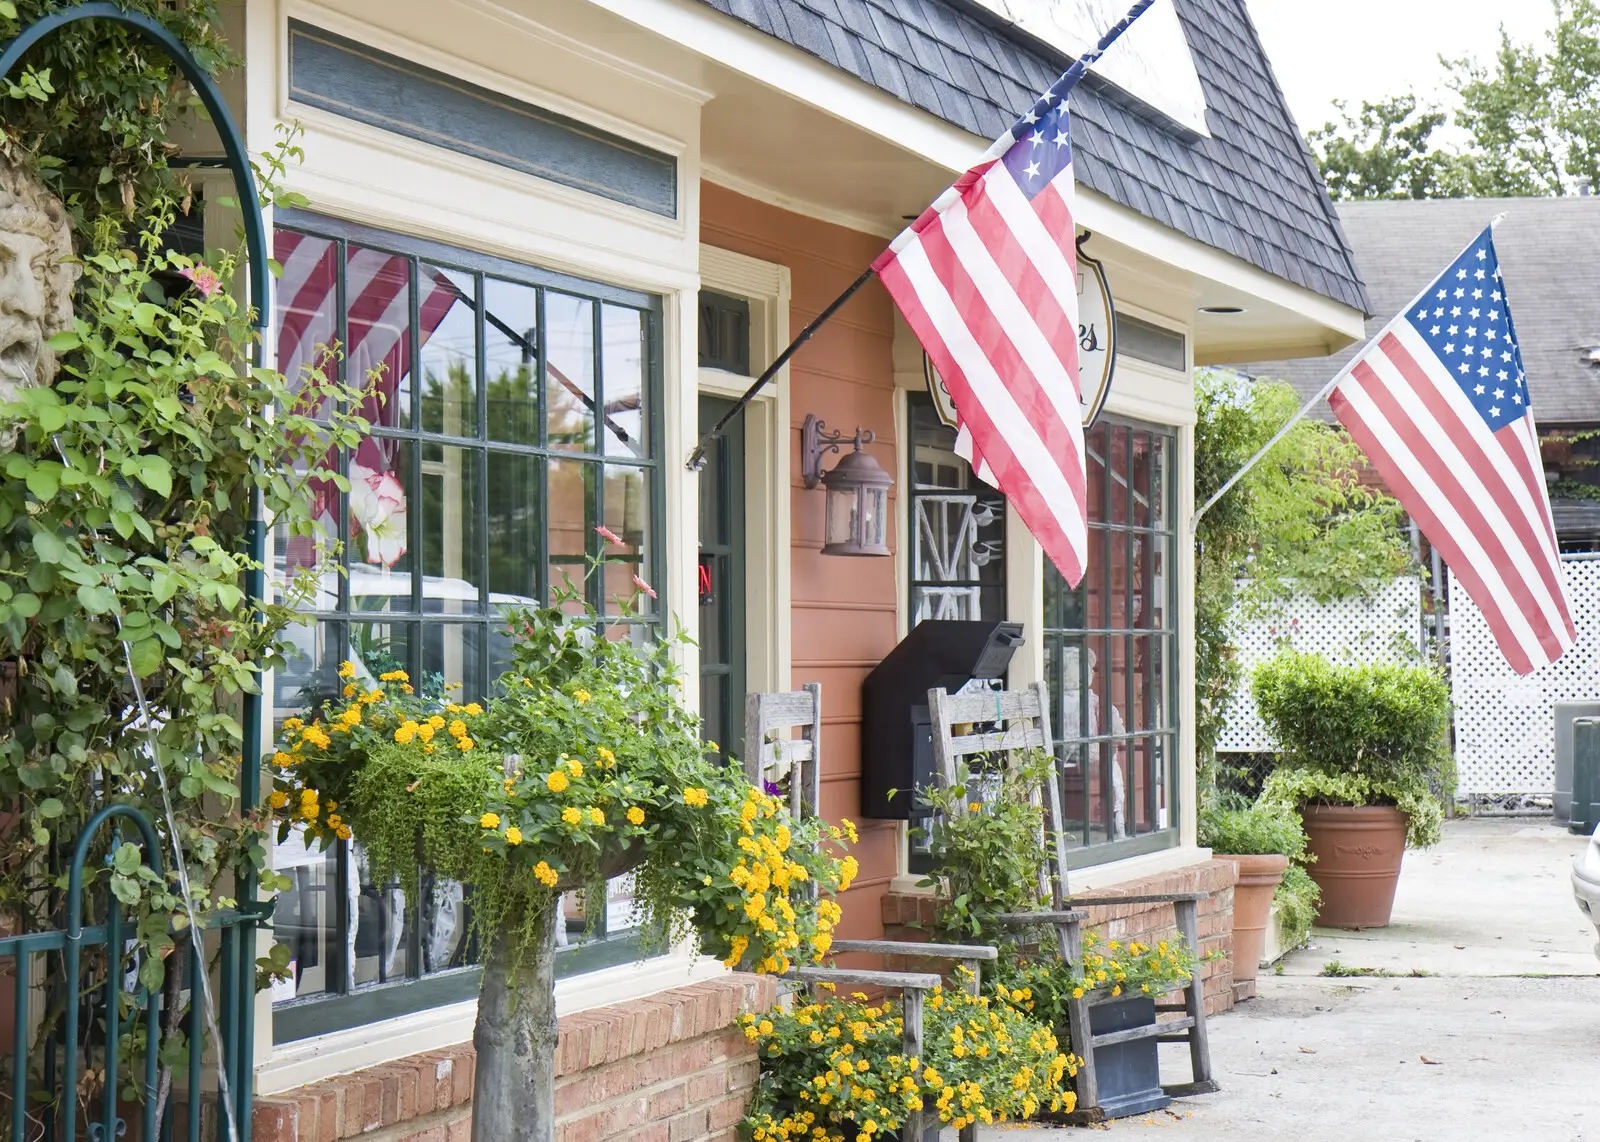 Small town street showing store fronts with green plants, some with yellow flowers on the sidewalk and flags on the corner of the buildign and by the door of the store.